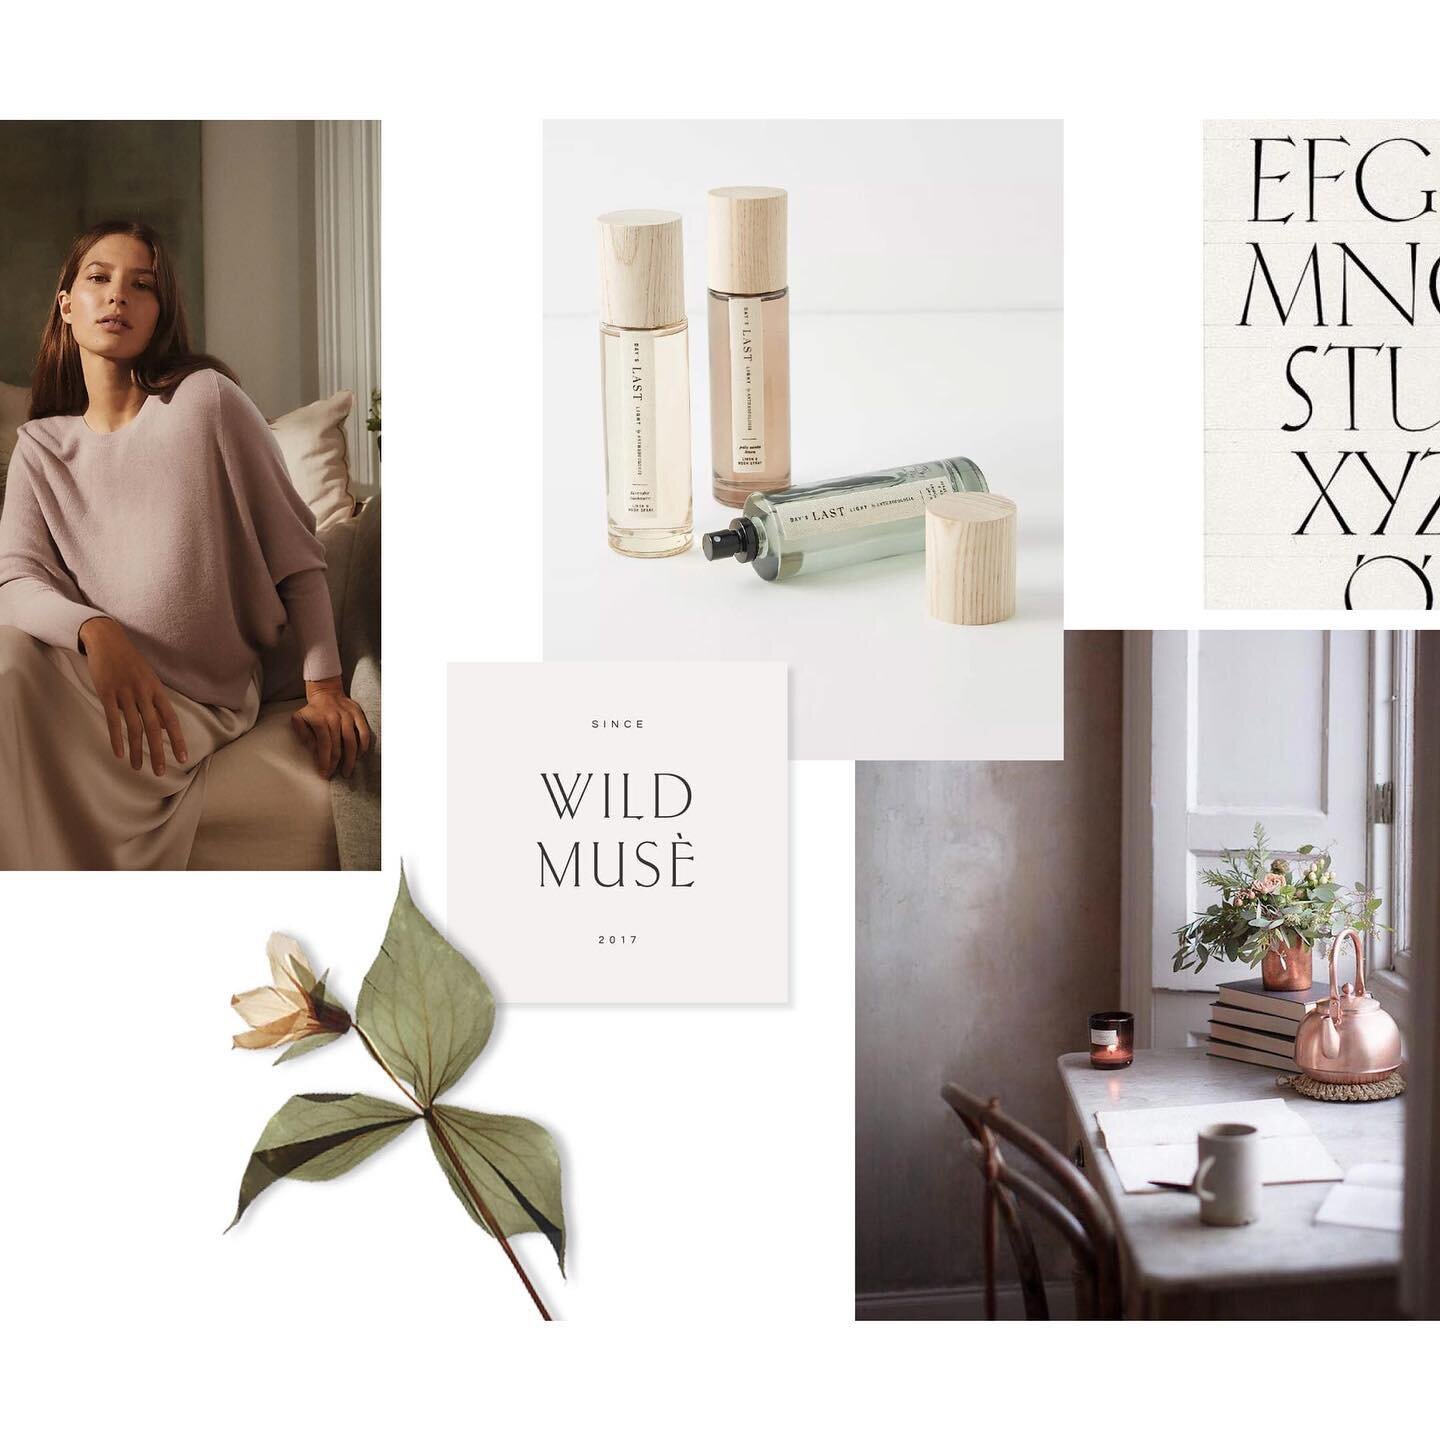 It&rsquo;s been a busy week finishing a website for an architect and interior design company in London, working on proposals and starting the intense but wonderful Elevate mentoring program. 

Enjoying the calming vibes of this moodboard and reminder